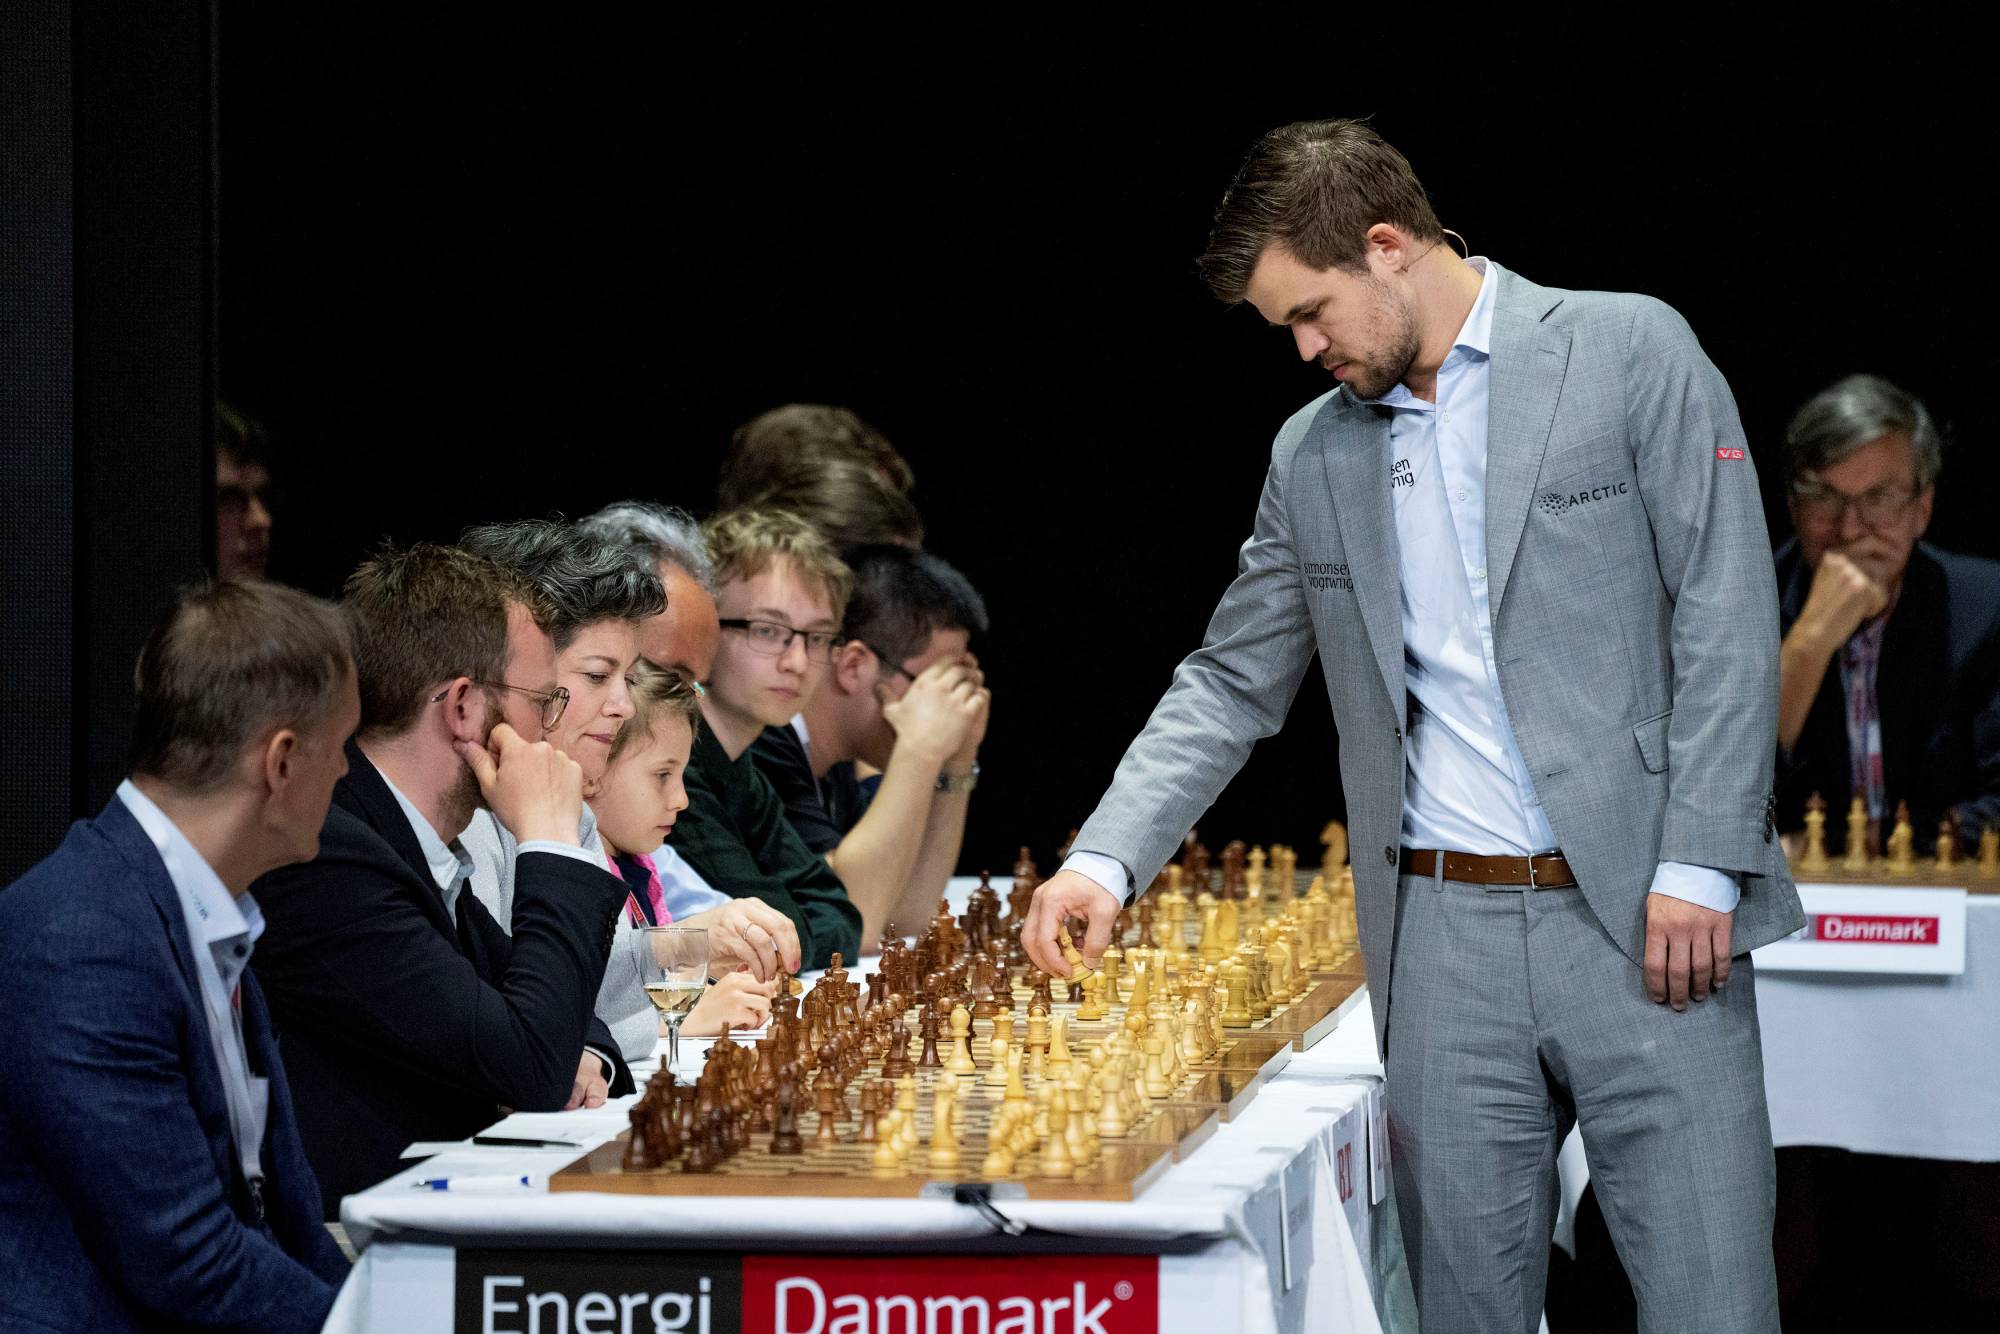 Magnus Carlsen Offers Commentary on Chess Cheating Accusations